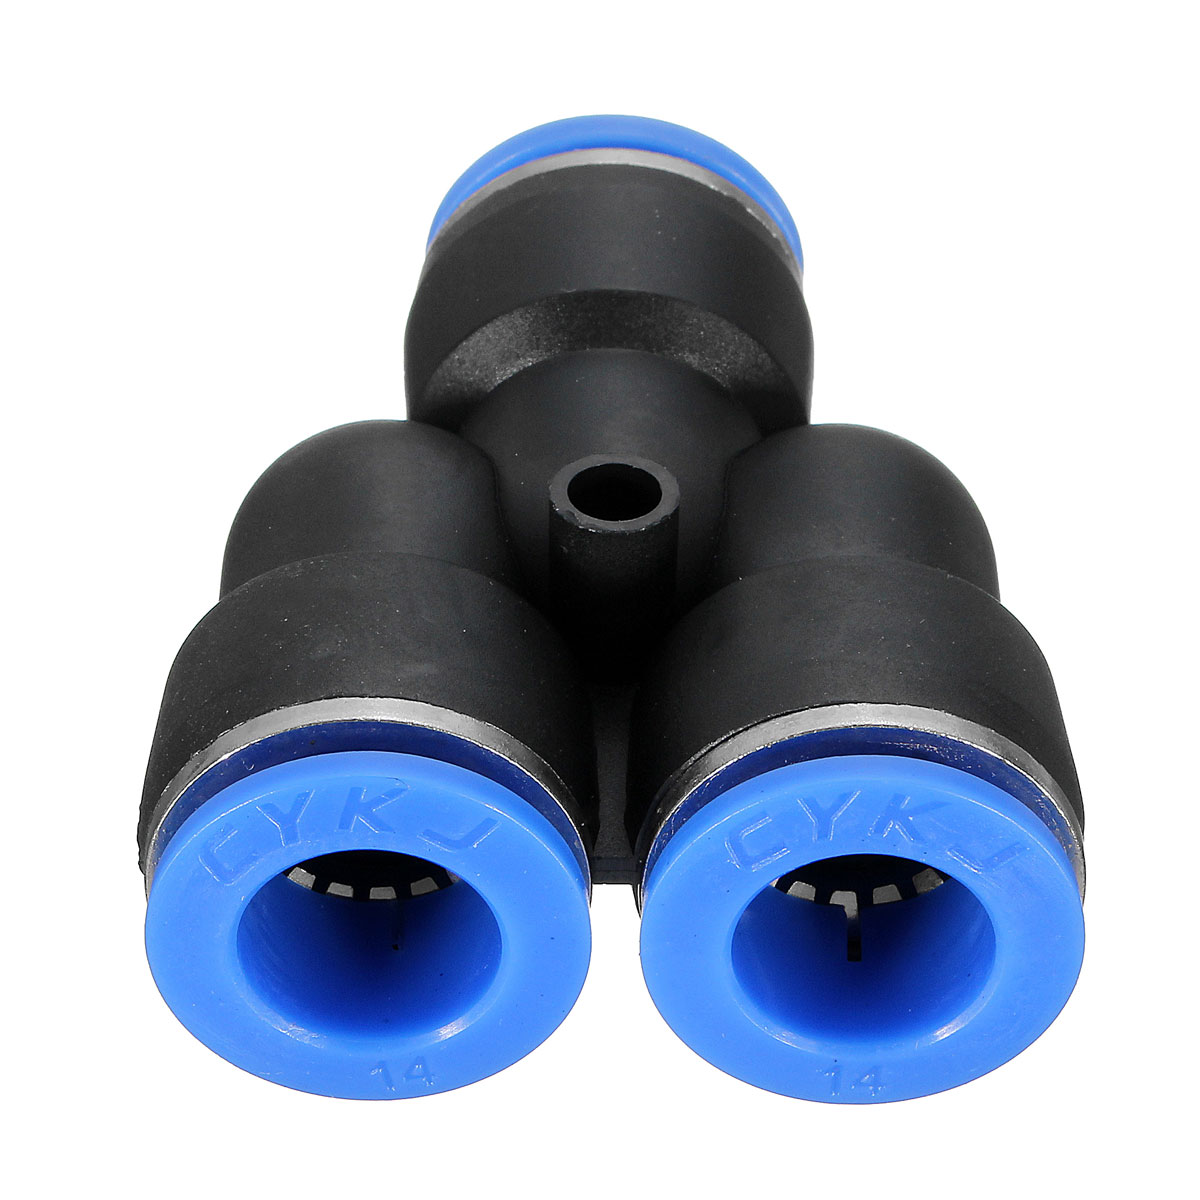 Pneumatic-Push-In-Fittings-For-Air-Water-Hose-Pipe-Connectors-Tube-Connector-1030560-8